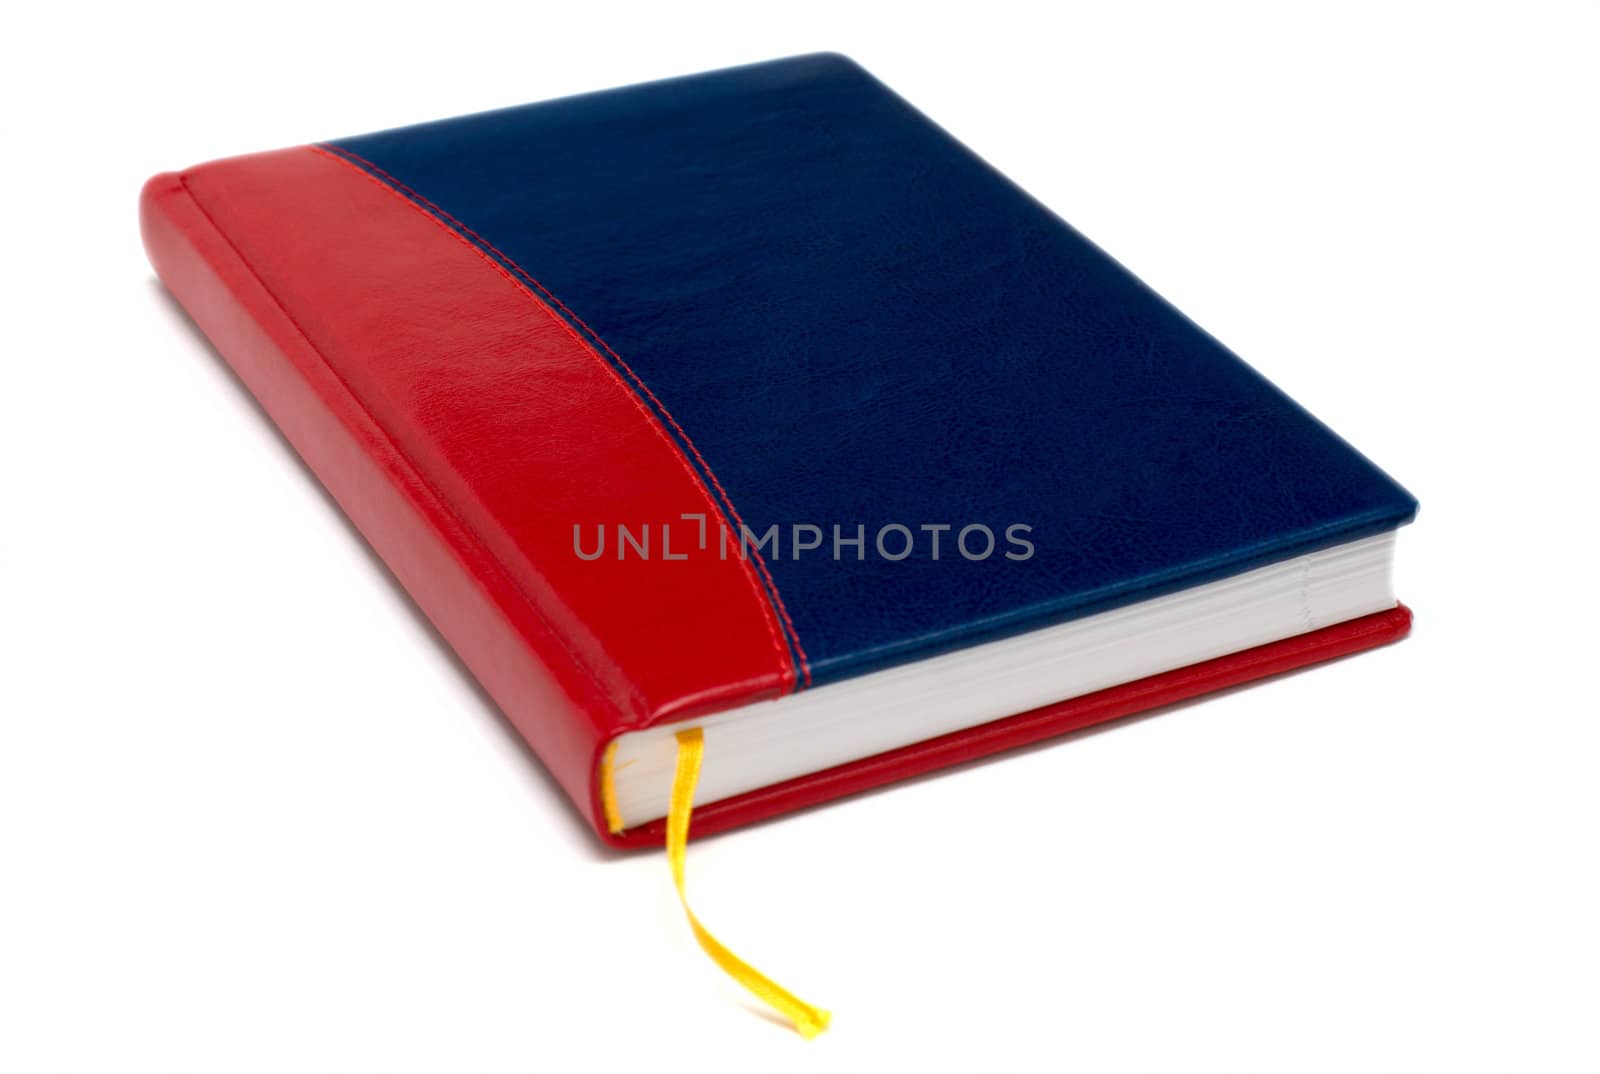 Colorful red-blue daily book, isolated